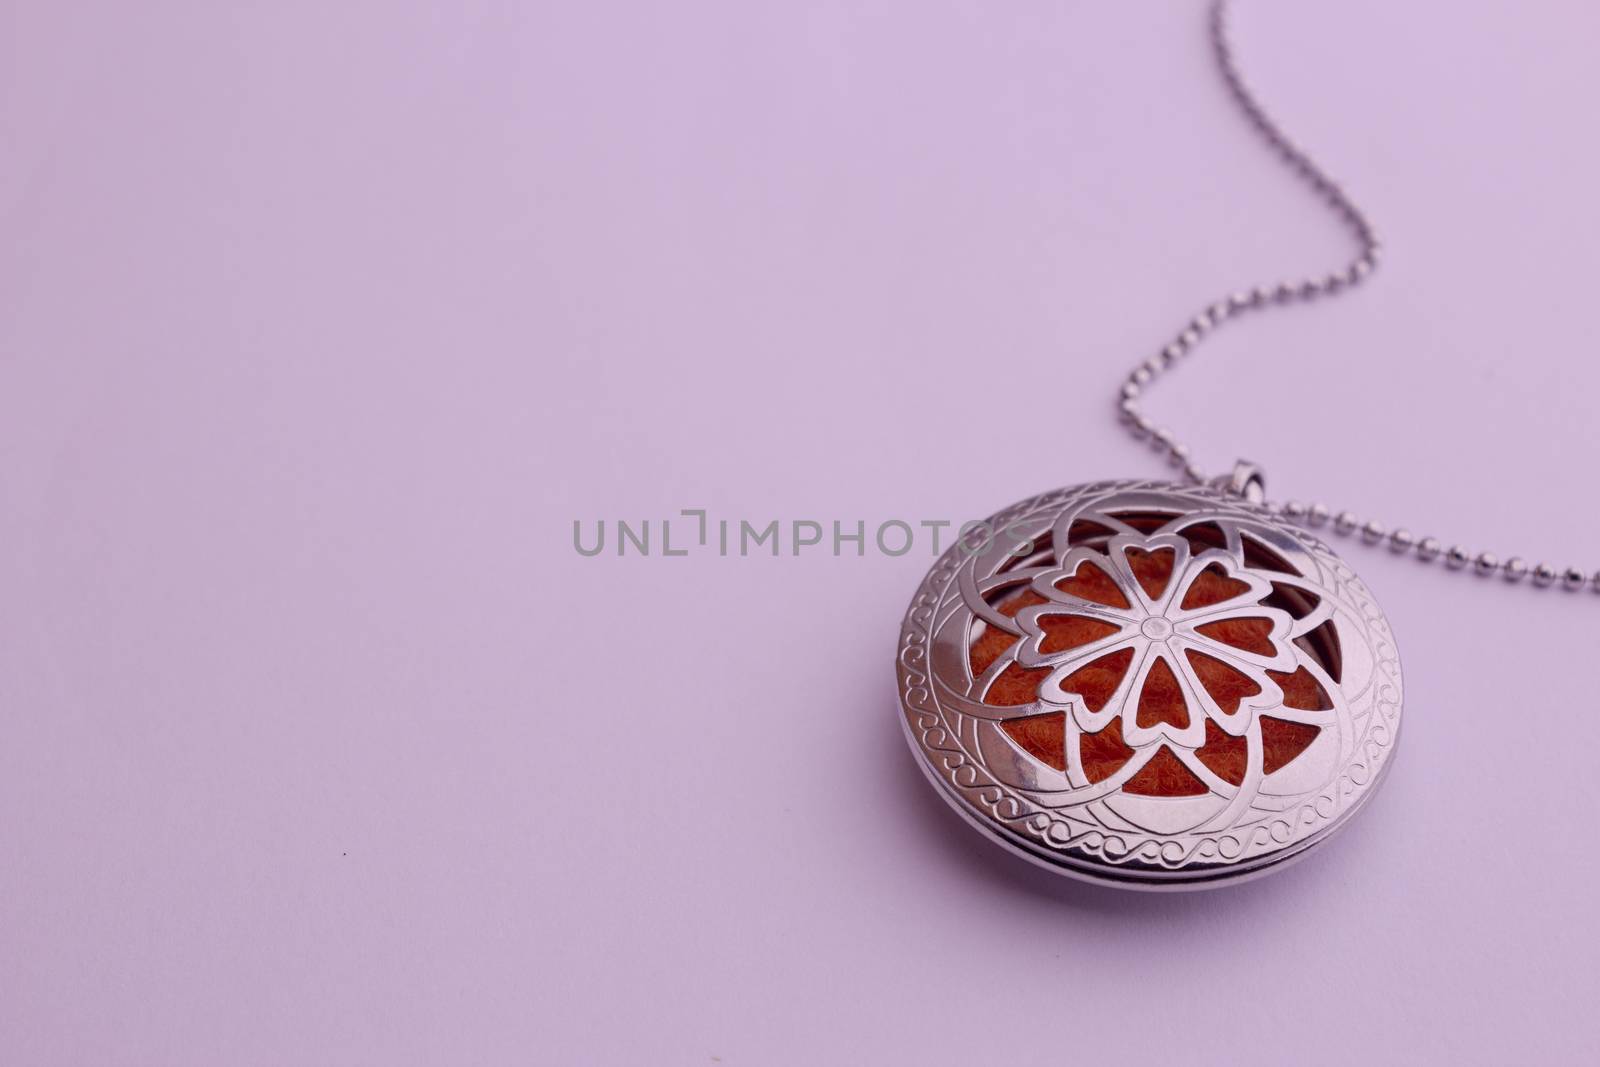 Essential oil infuser used as pendant of a necklace